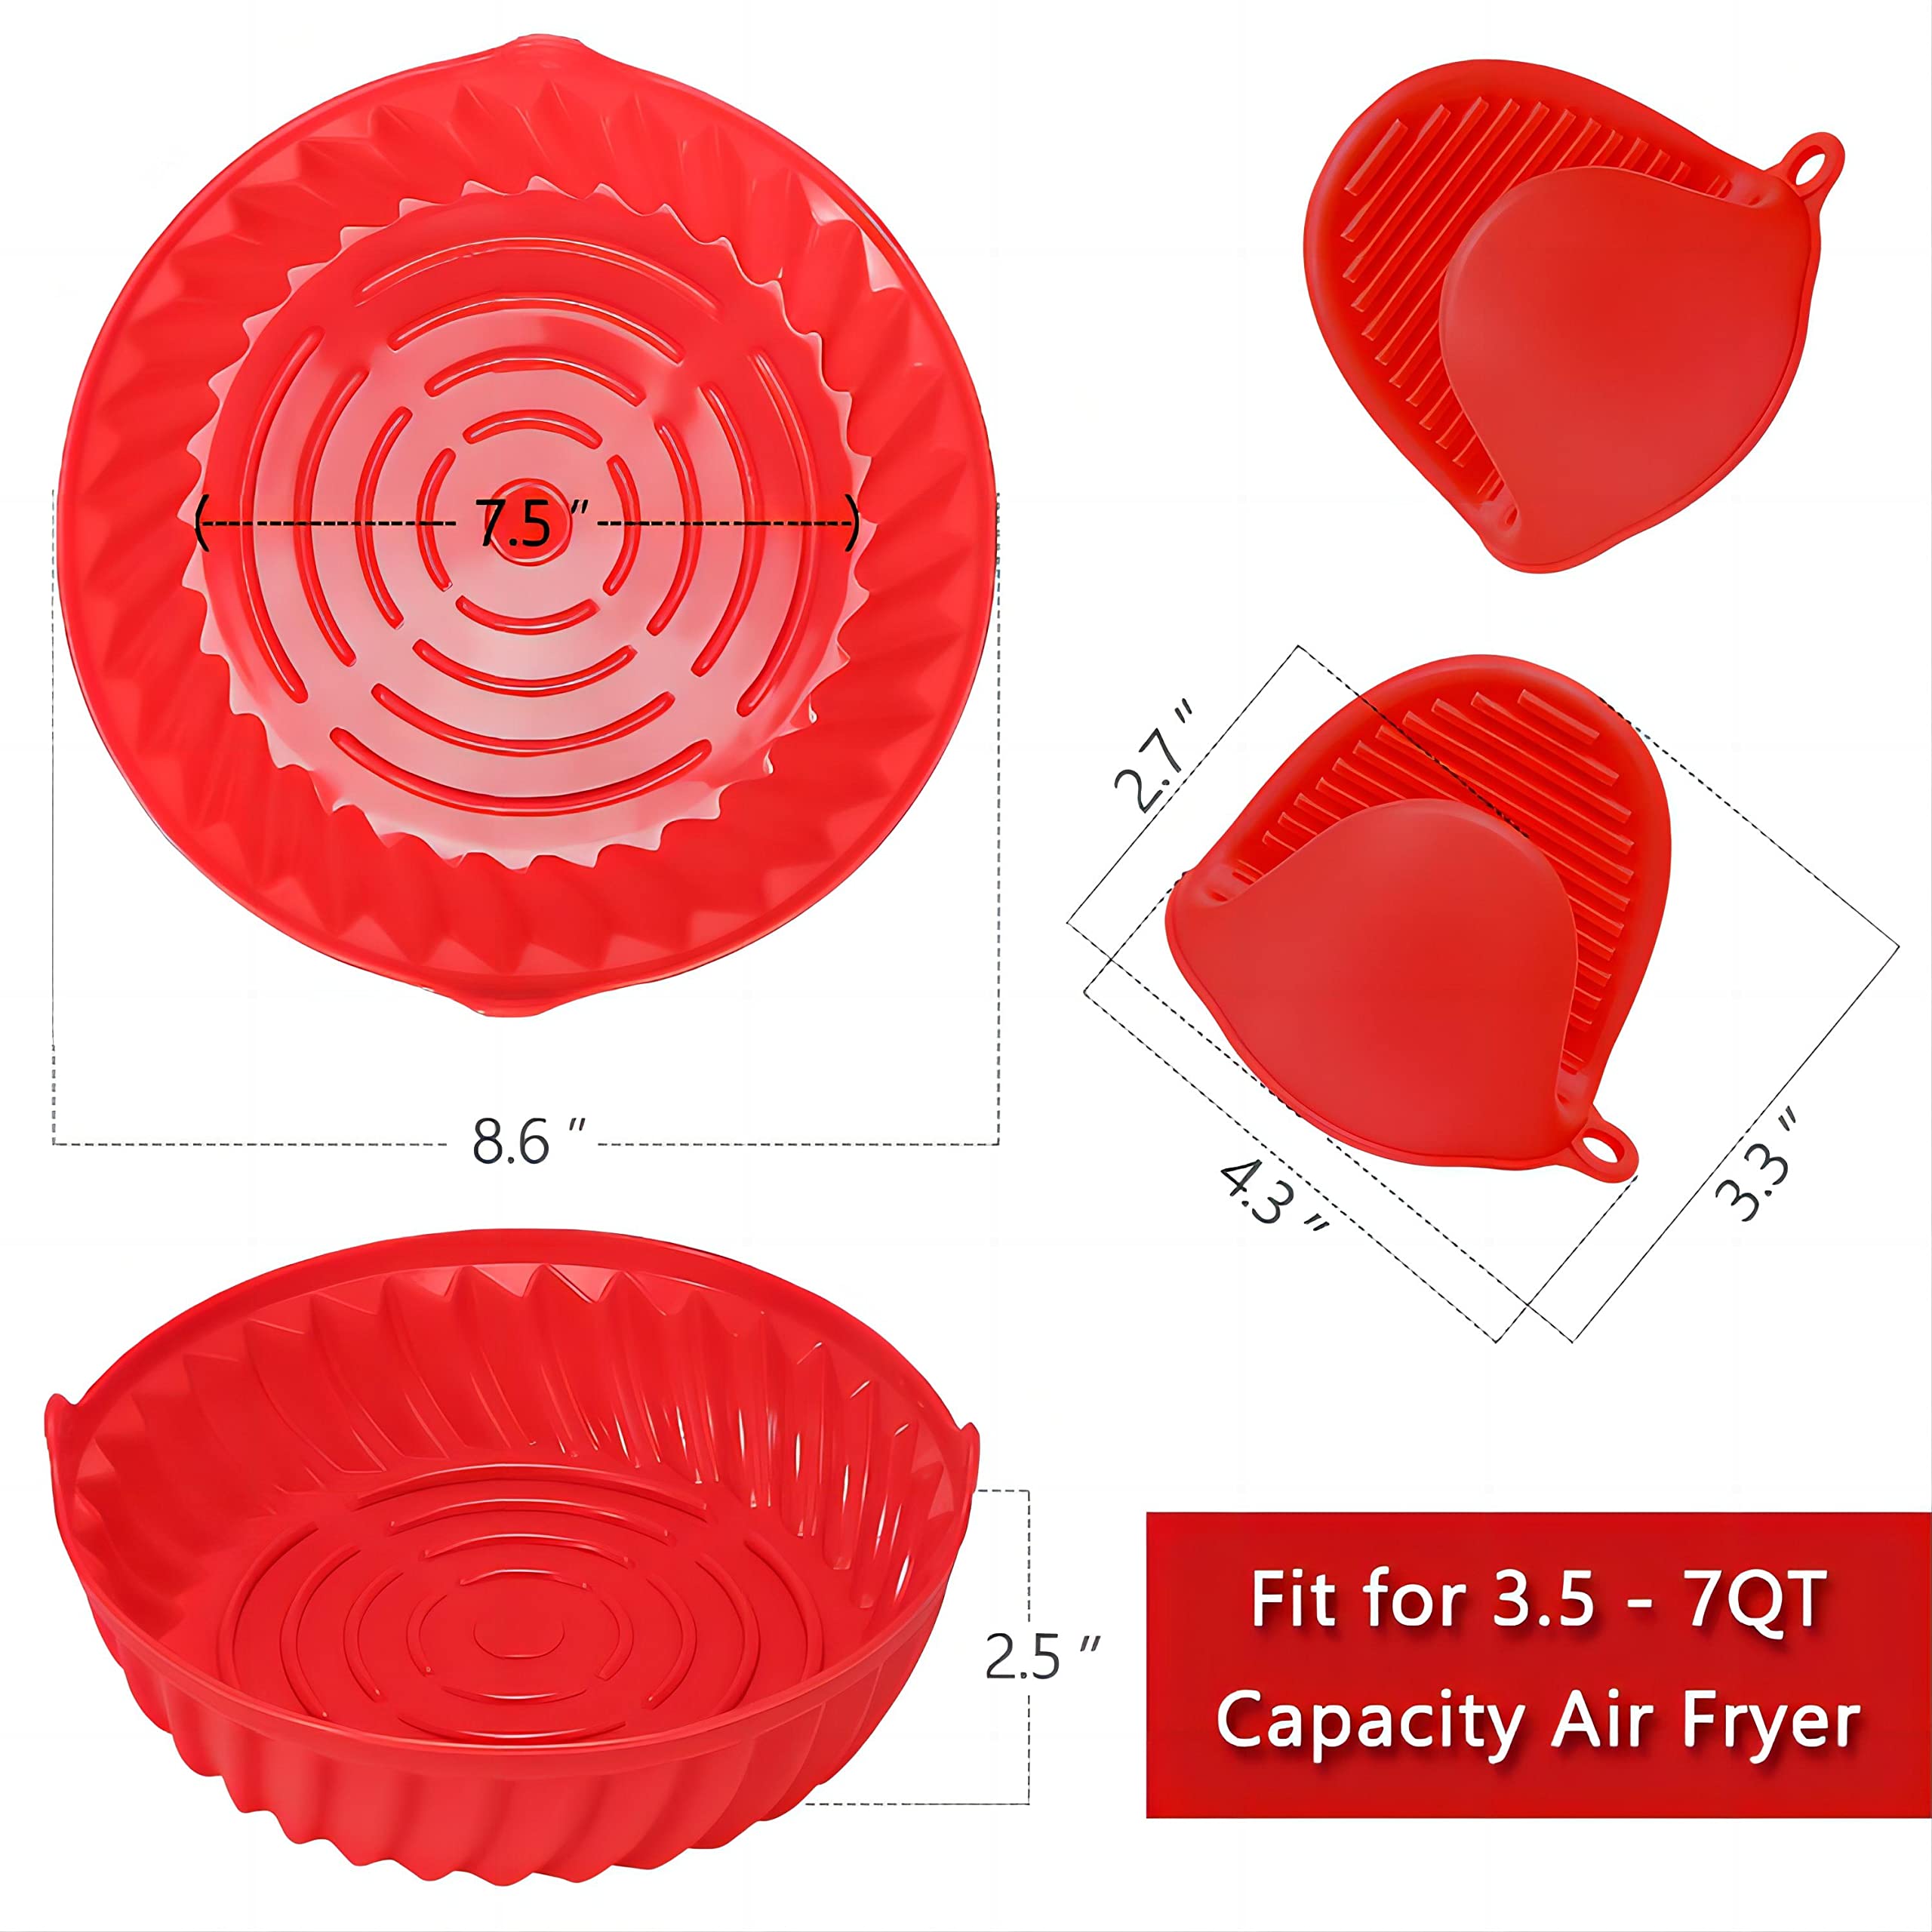 Air Fryer Silicone Liners - 8.6inch Reusable Silicone Air Fryer Liners,With Heat-resistant Gloves,Baking Food Safe For 3.5-7QT Air Fryer Basket,Easy Clean-up(Red)